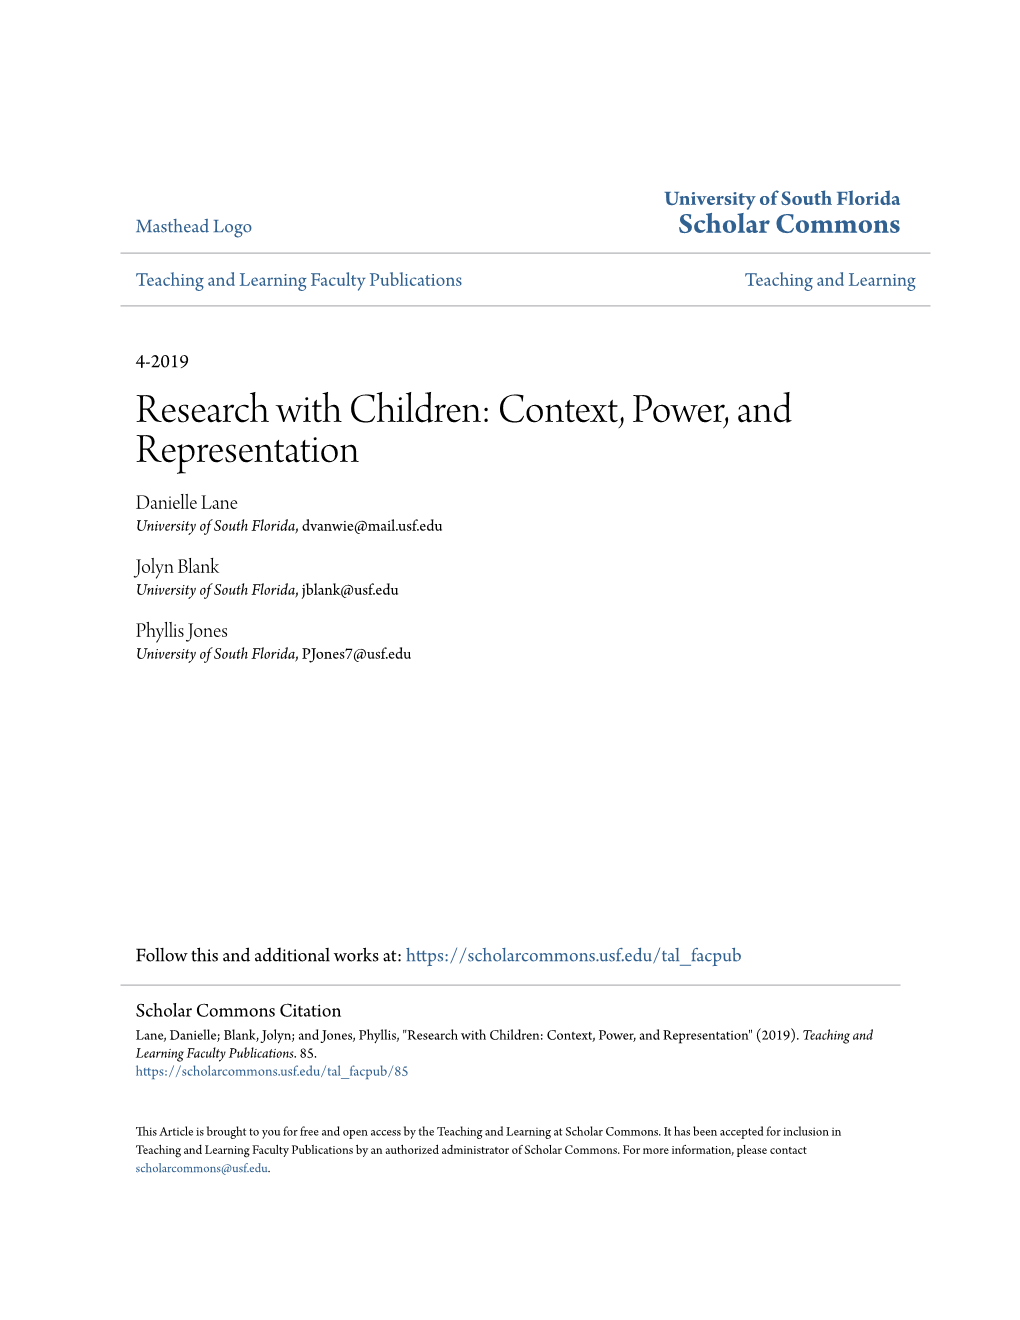 Research with Children: Context, Power, and Representation Danielle Lane University of South Florida, Dvanwie@Mail.Usf.Edu